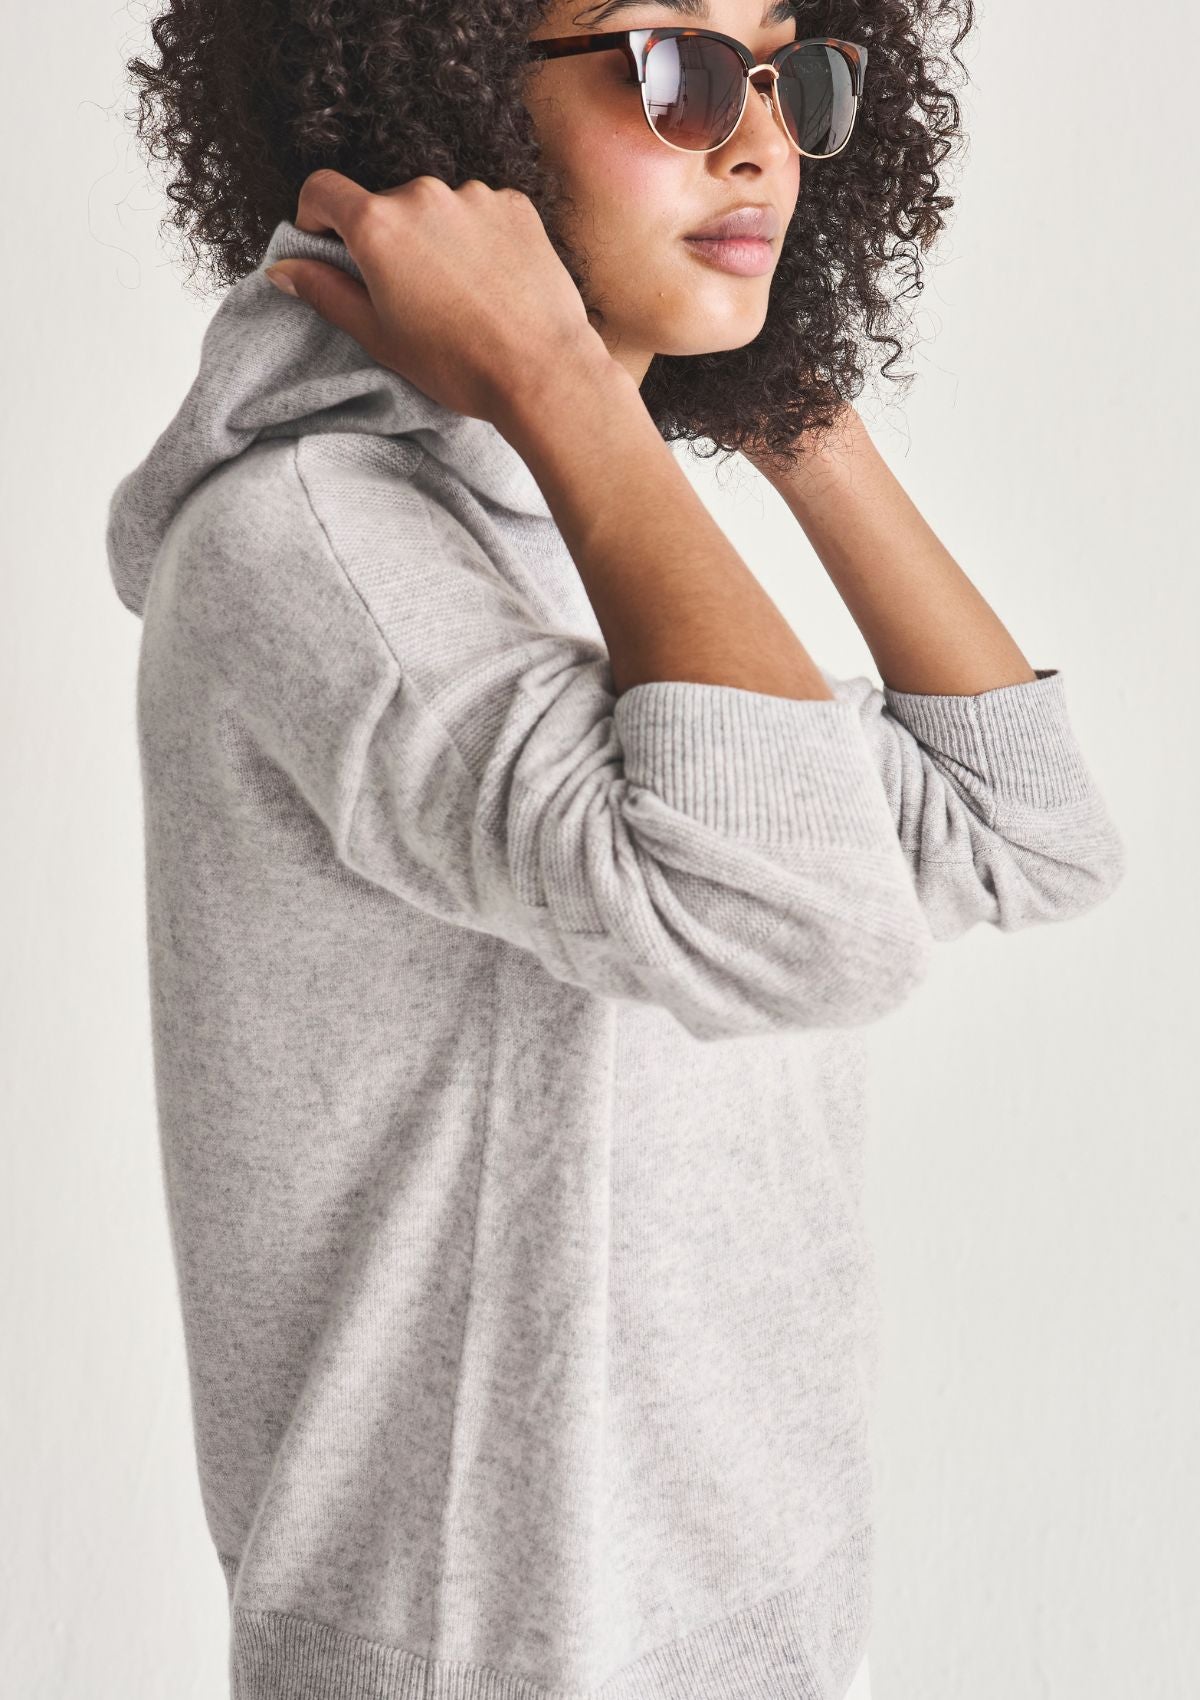 Cashmere Lace Neck Hoodie in Foggy Grey